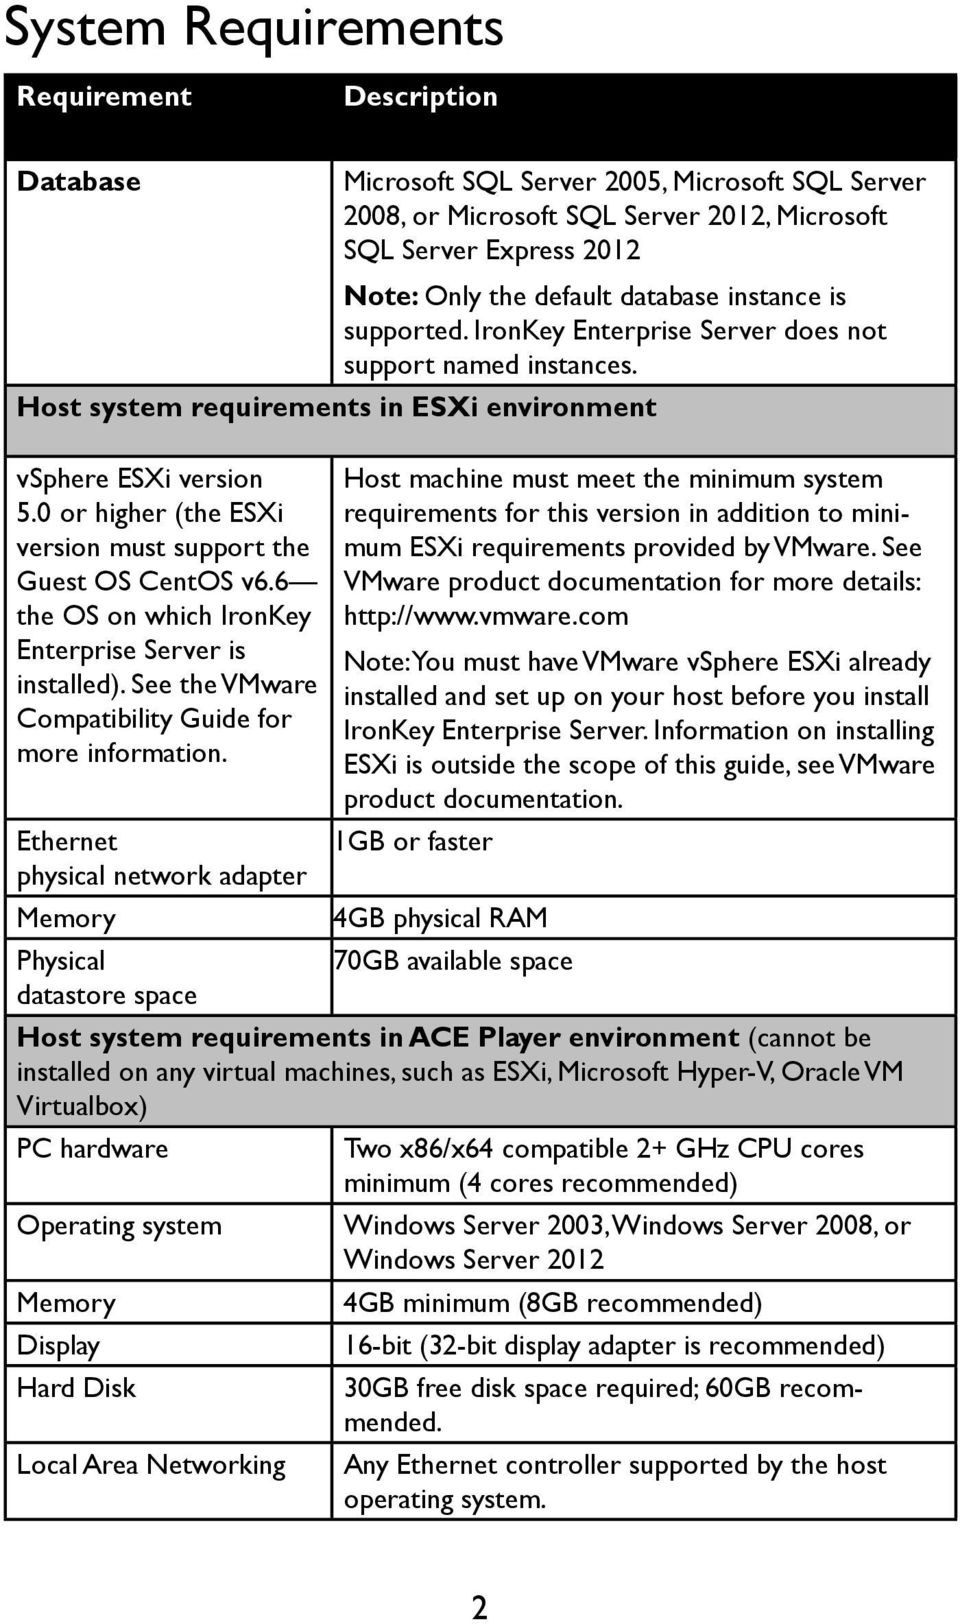 0 or higher (the ESXi version must support the Guest OS CentOS v6.6 the OS on which IronKey Enterprise Server is installed). See the VMware Compatibility Guide for more information.